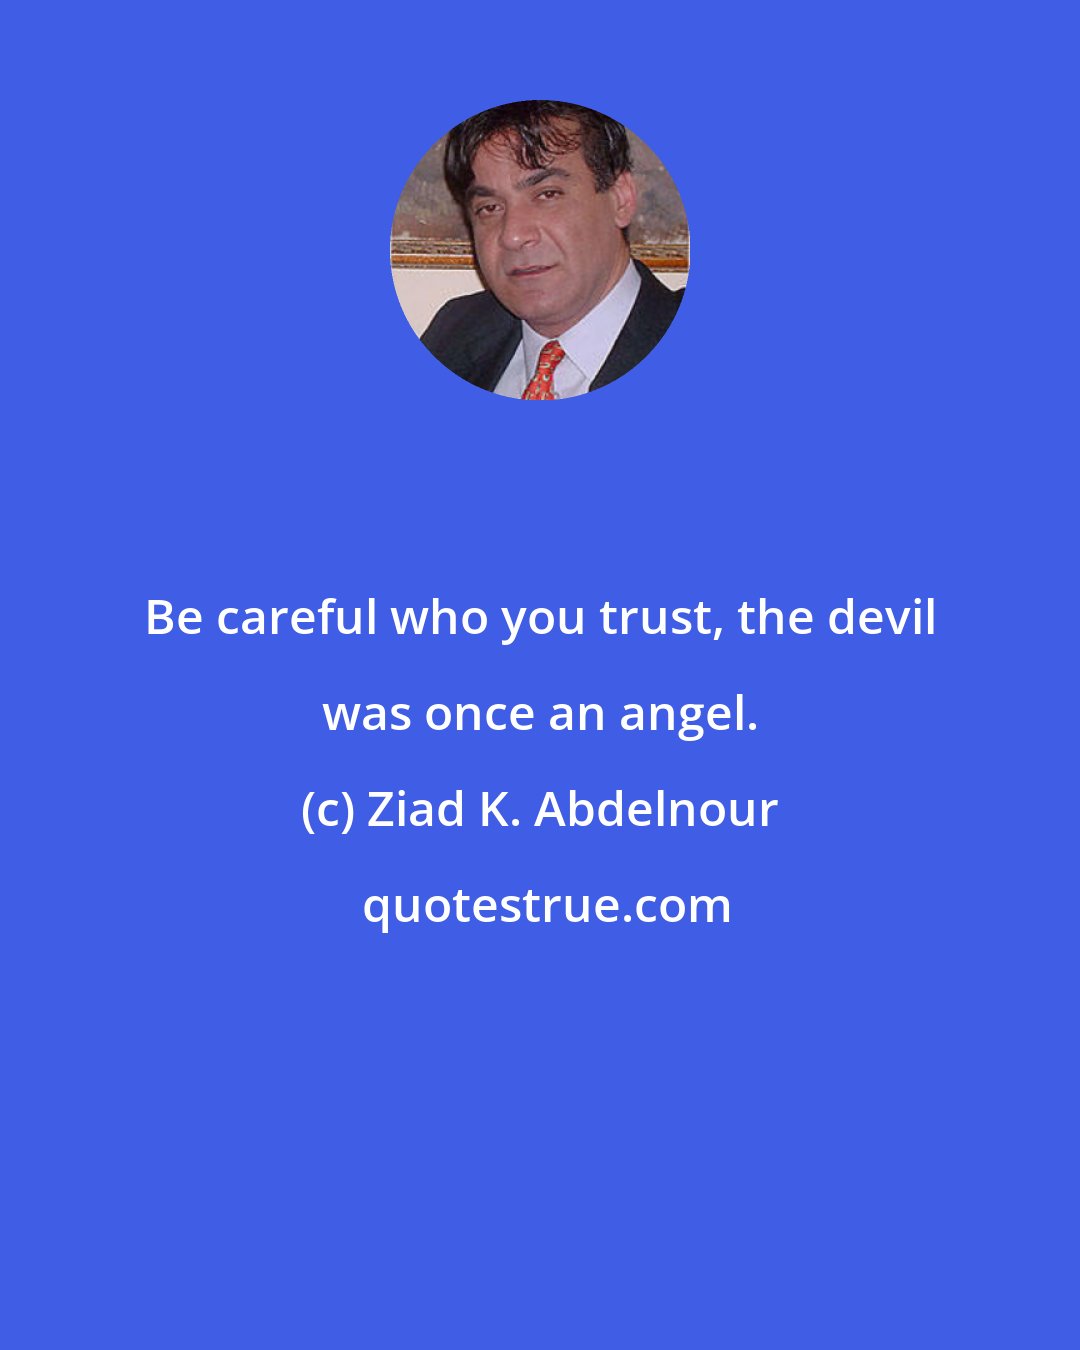 Ziad K. Abdelnour: Be careful who you trust, the devil was once an angel.